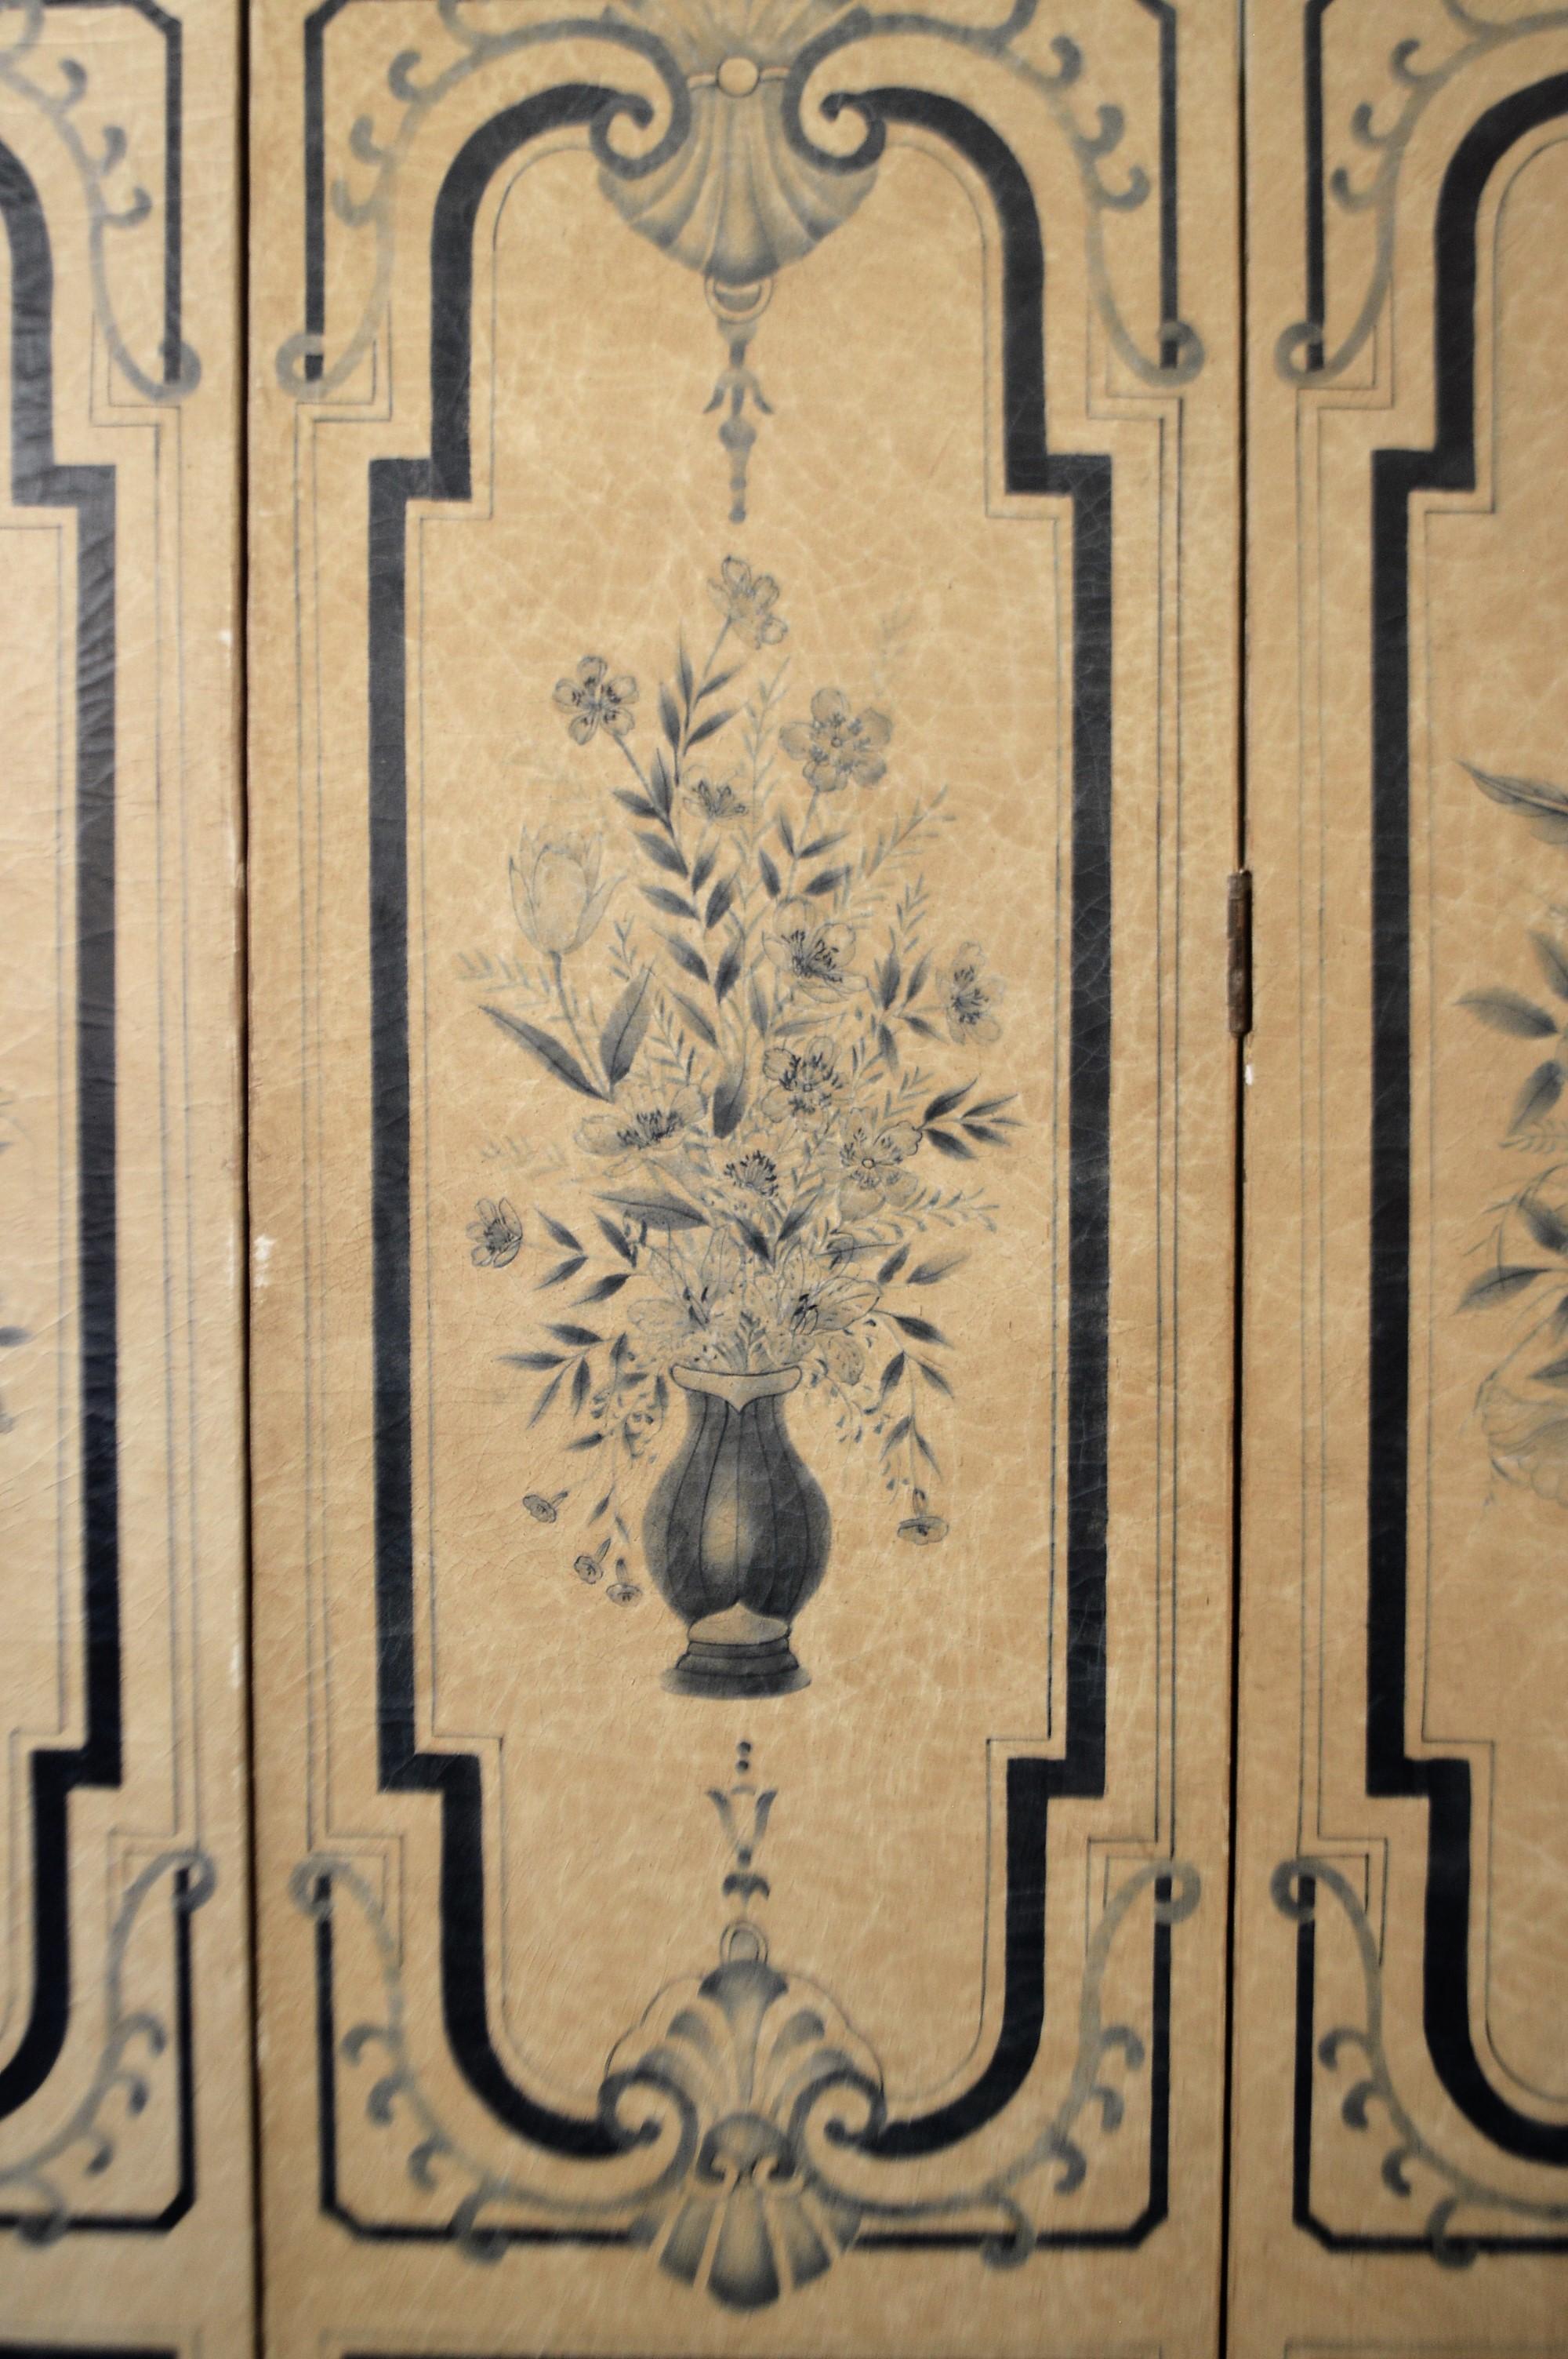 19th century para-vent, screen, hand painted with floral motifs in navy blue, painted on parchment paper.
There are four panels each of 16